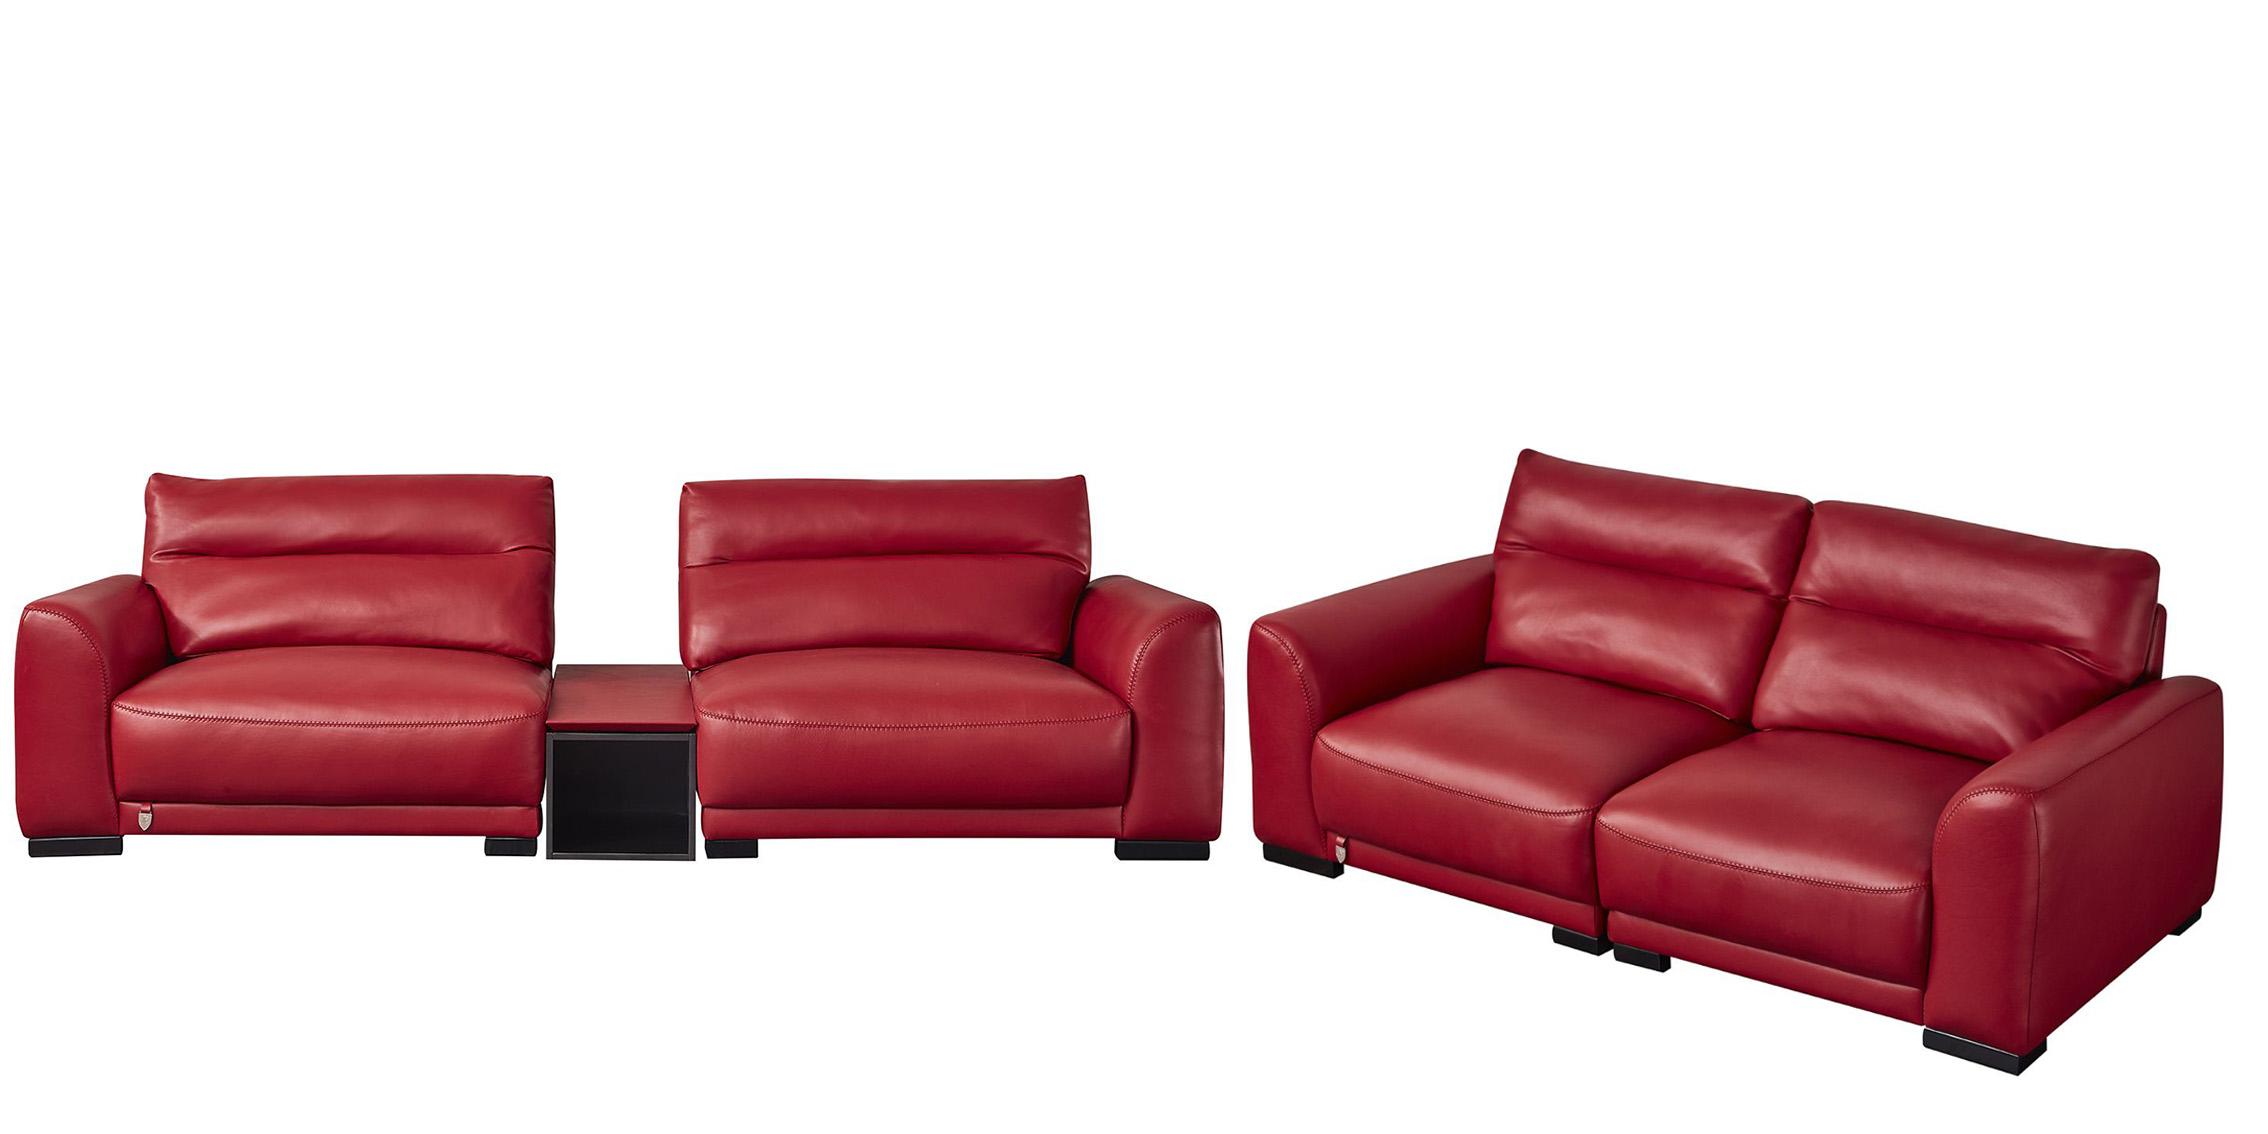 Contemporary Sofa Loveseat and Table EK8012-RED-SET EK8012-RED-SET in Red Leather